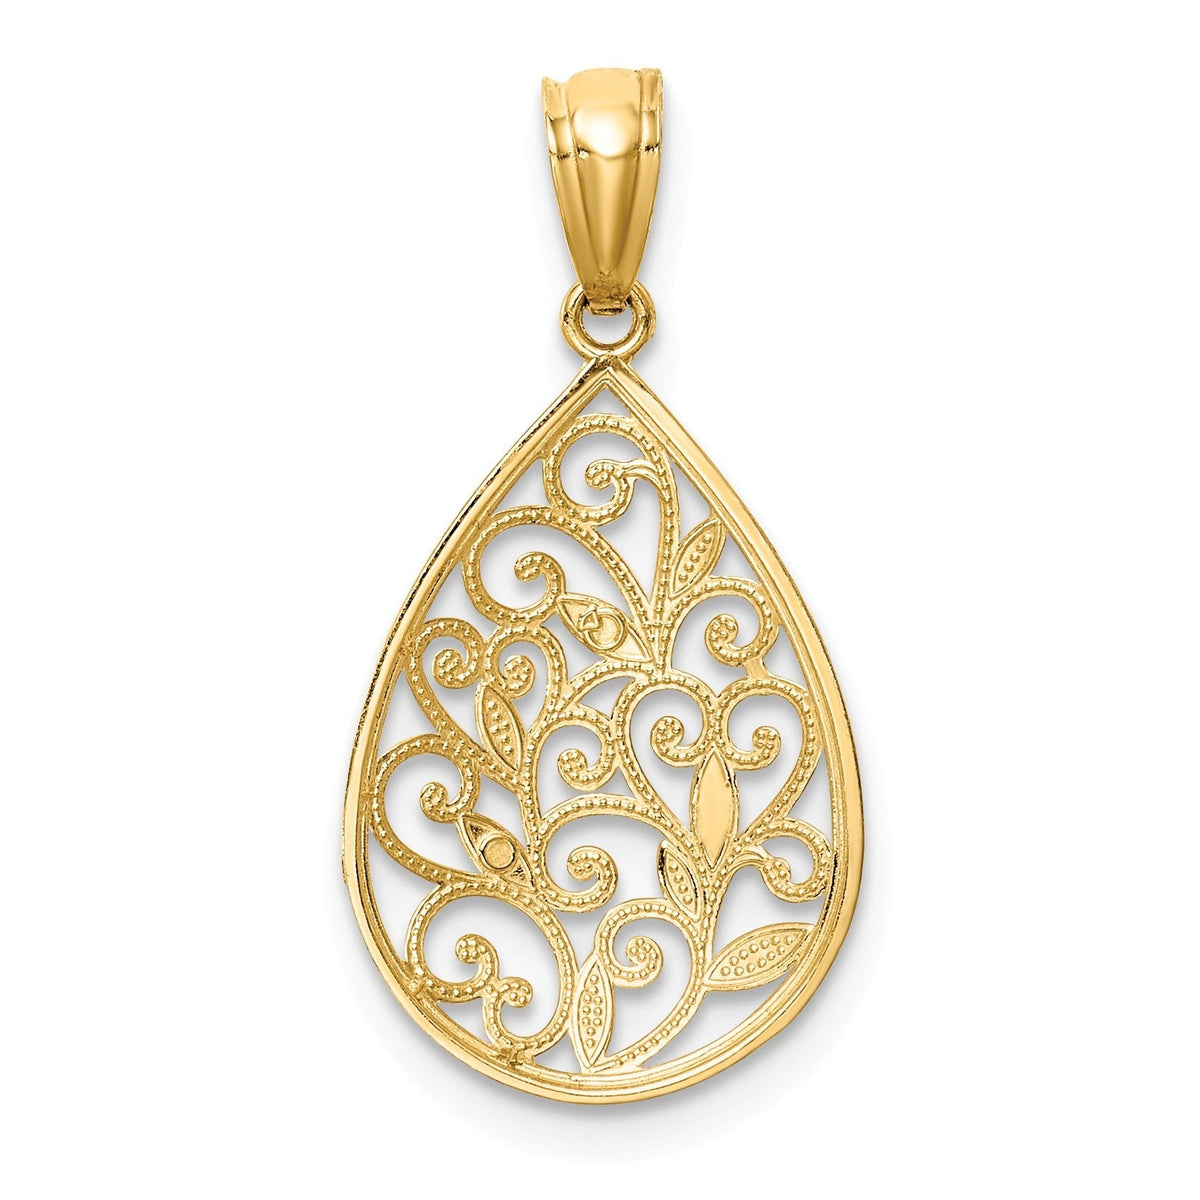 Alternate view of the 14k Yellow Gold Small Filigree Teardrop Pendant, 13mm (1/2 inch) by The Black Bow Jewelry Co.